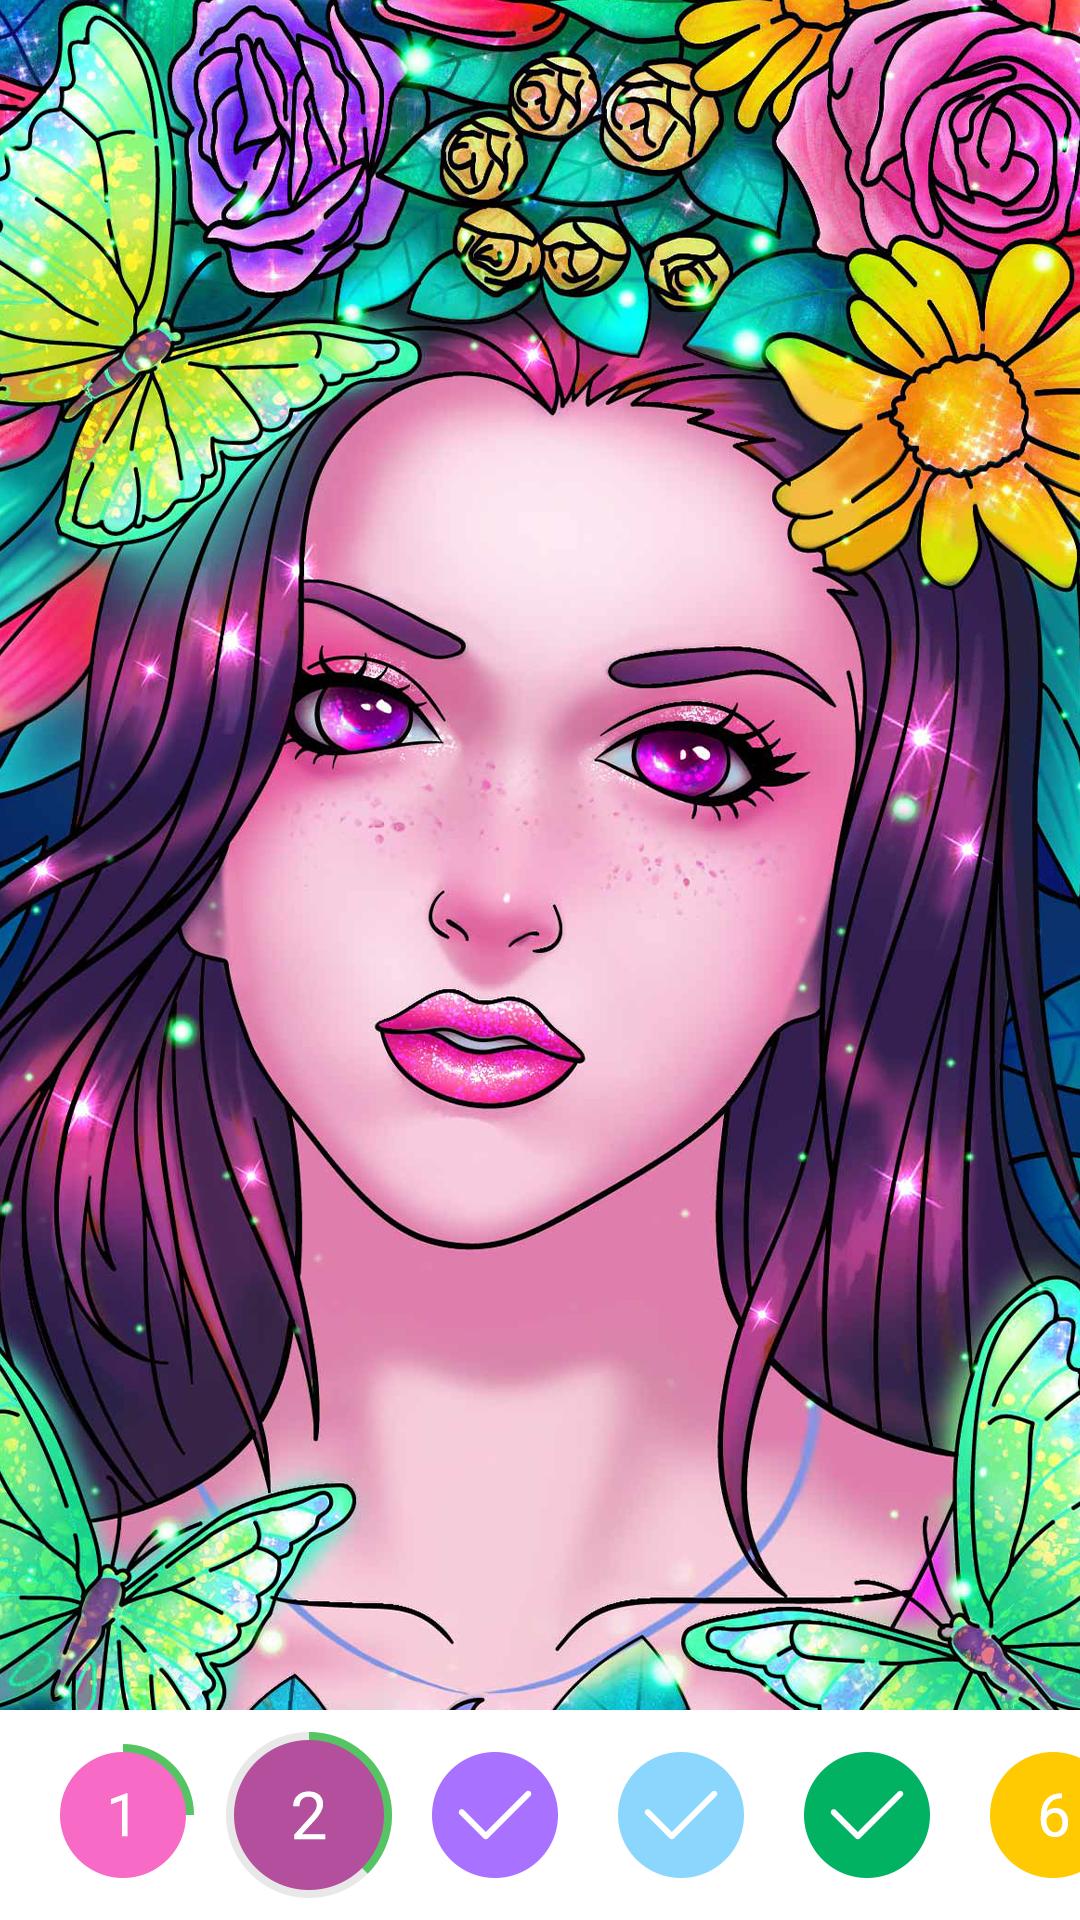 Coloring Book Color by Number & Paint by Number 1.6.11 Screenshot 11